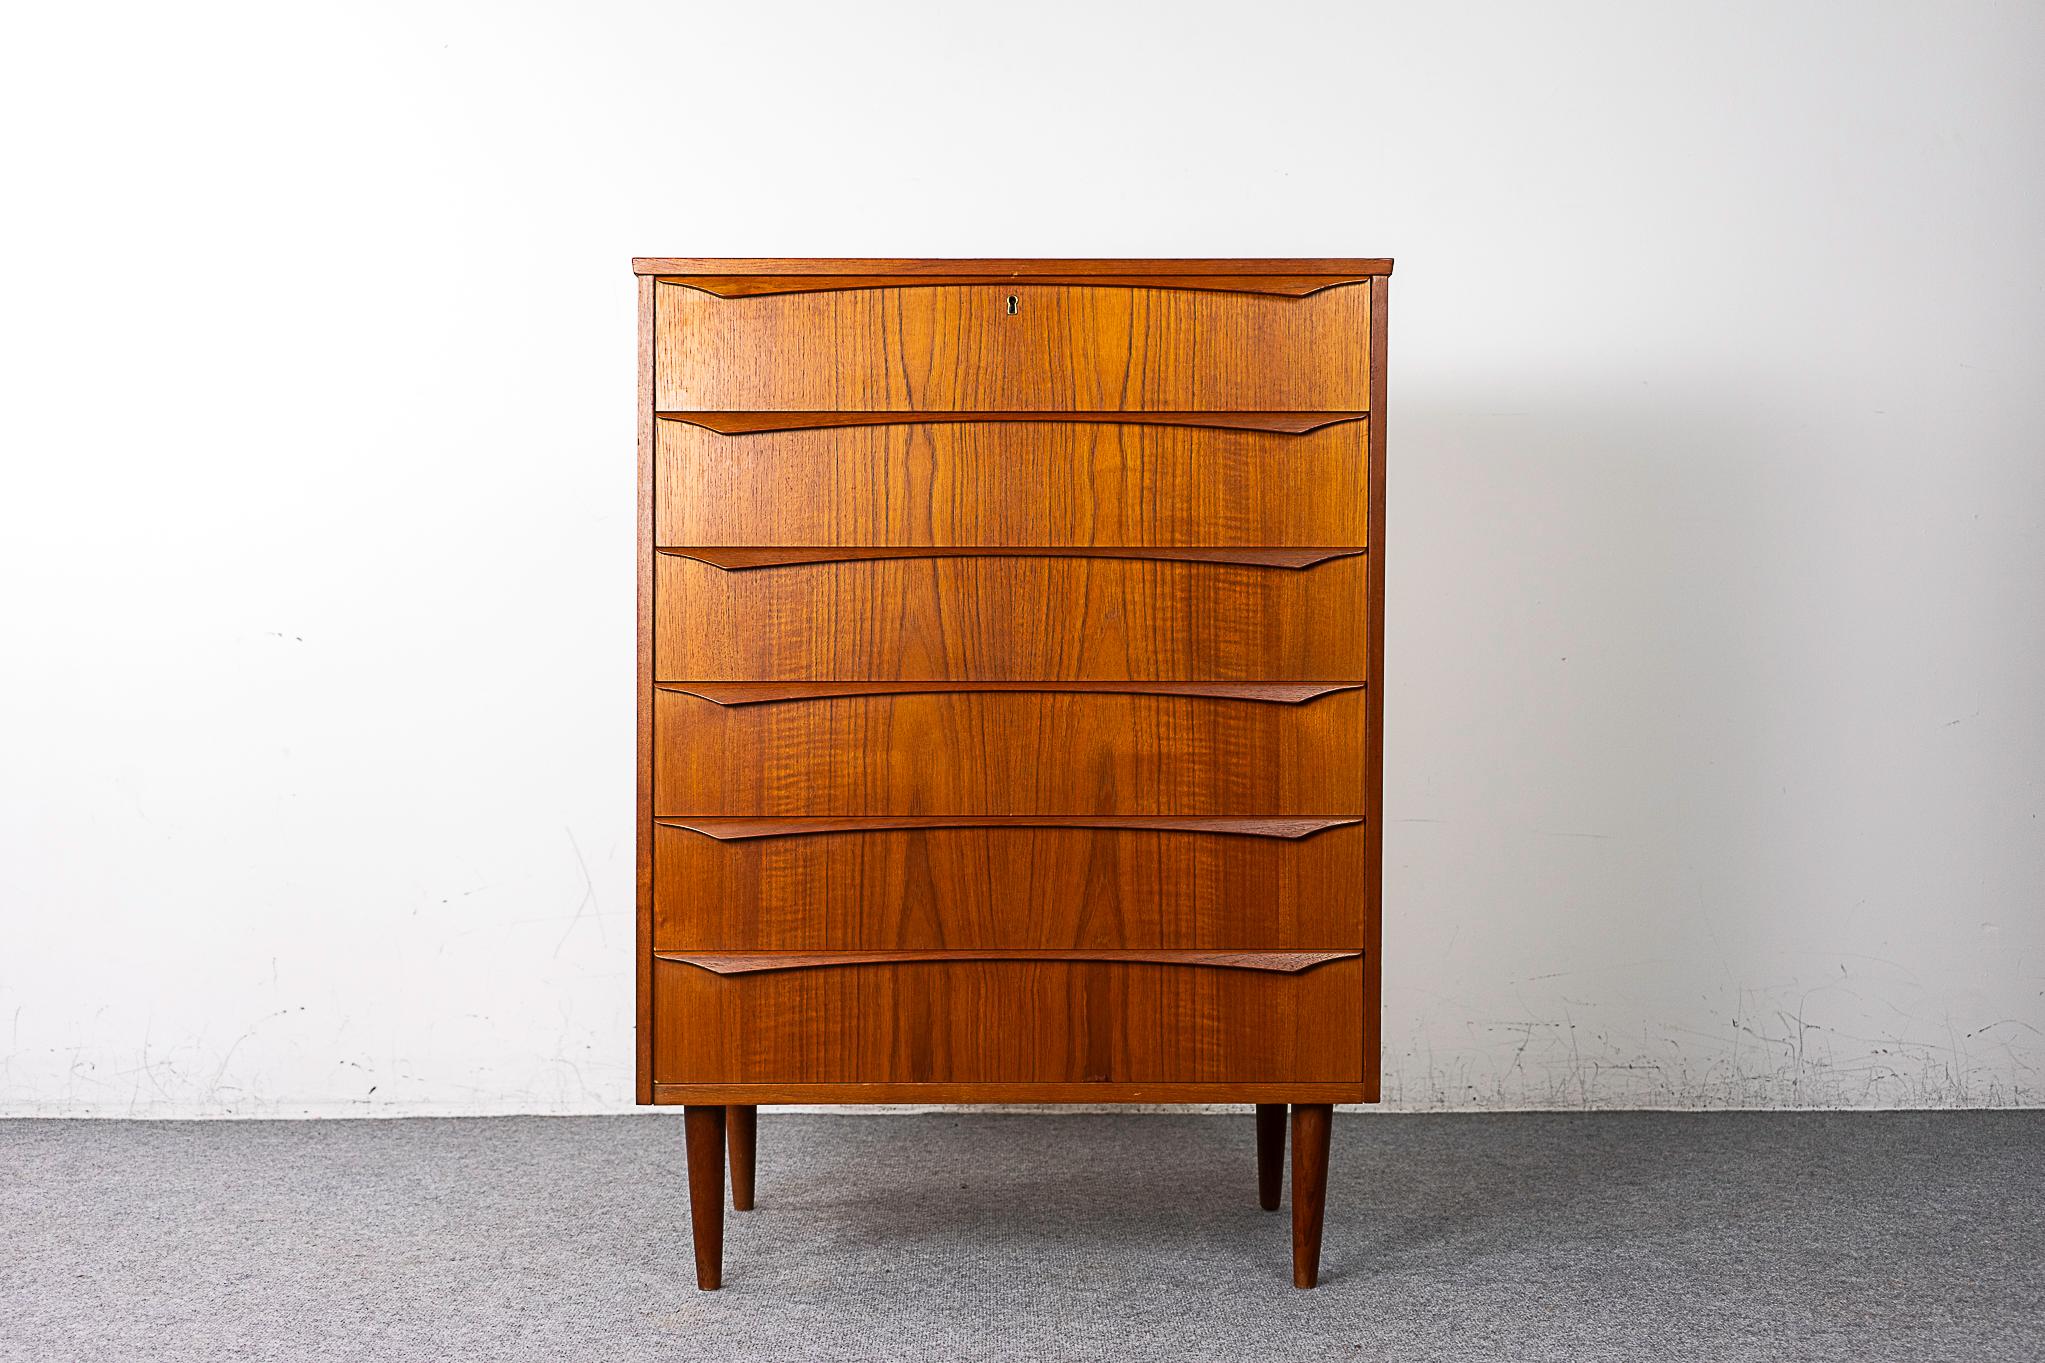 Teak Danish dresser, circa 1960's. Stunning book-matched veneer top, sides and drawer faces. Integrated, horizontal drawer pulls and dovetail construction. Sleek tapering legs!

Please inquire for remote and international shipping rates.